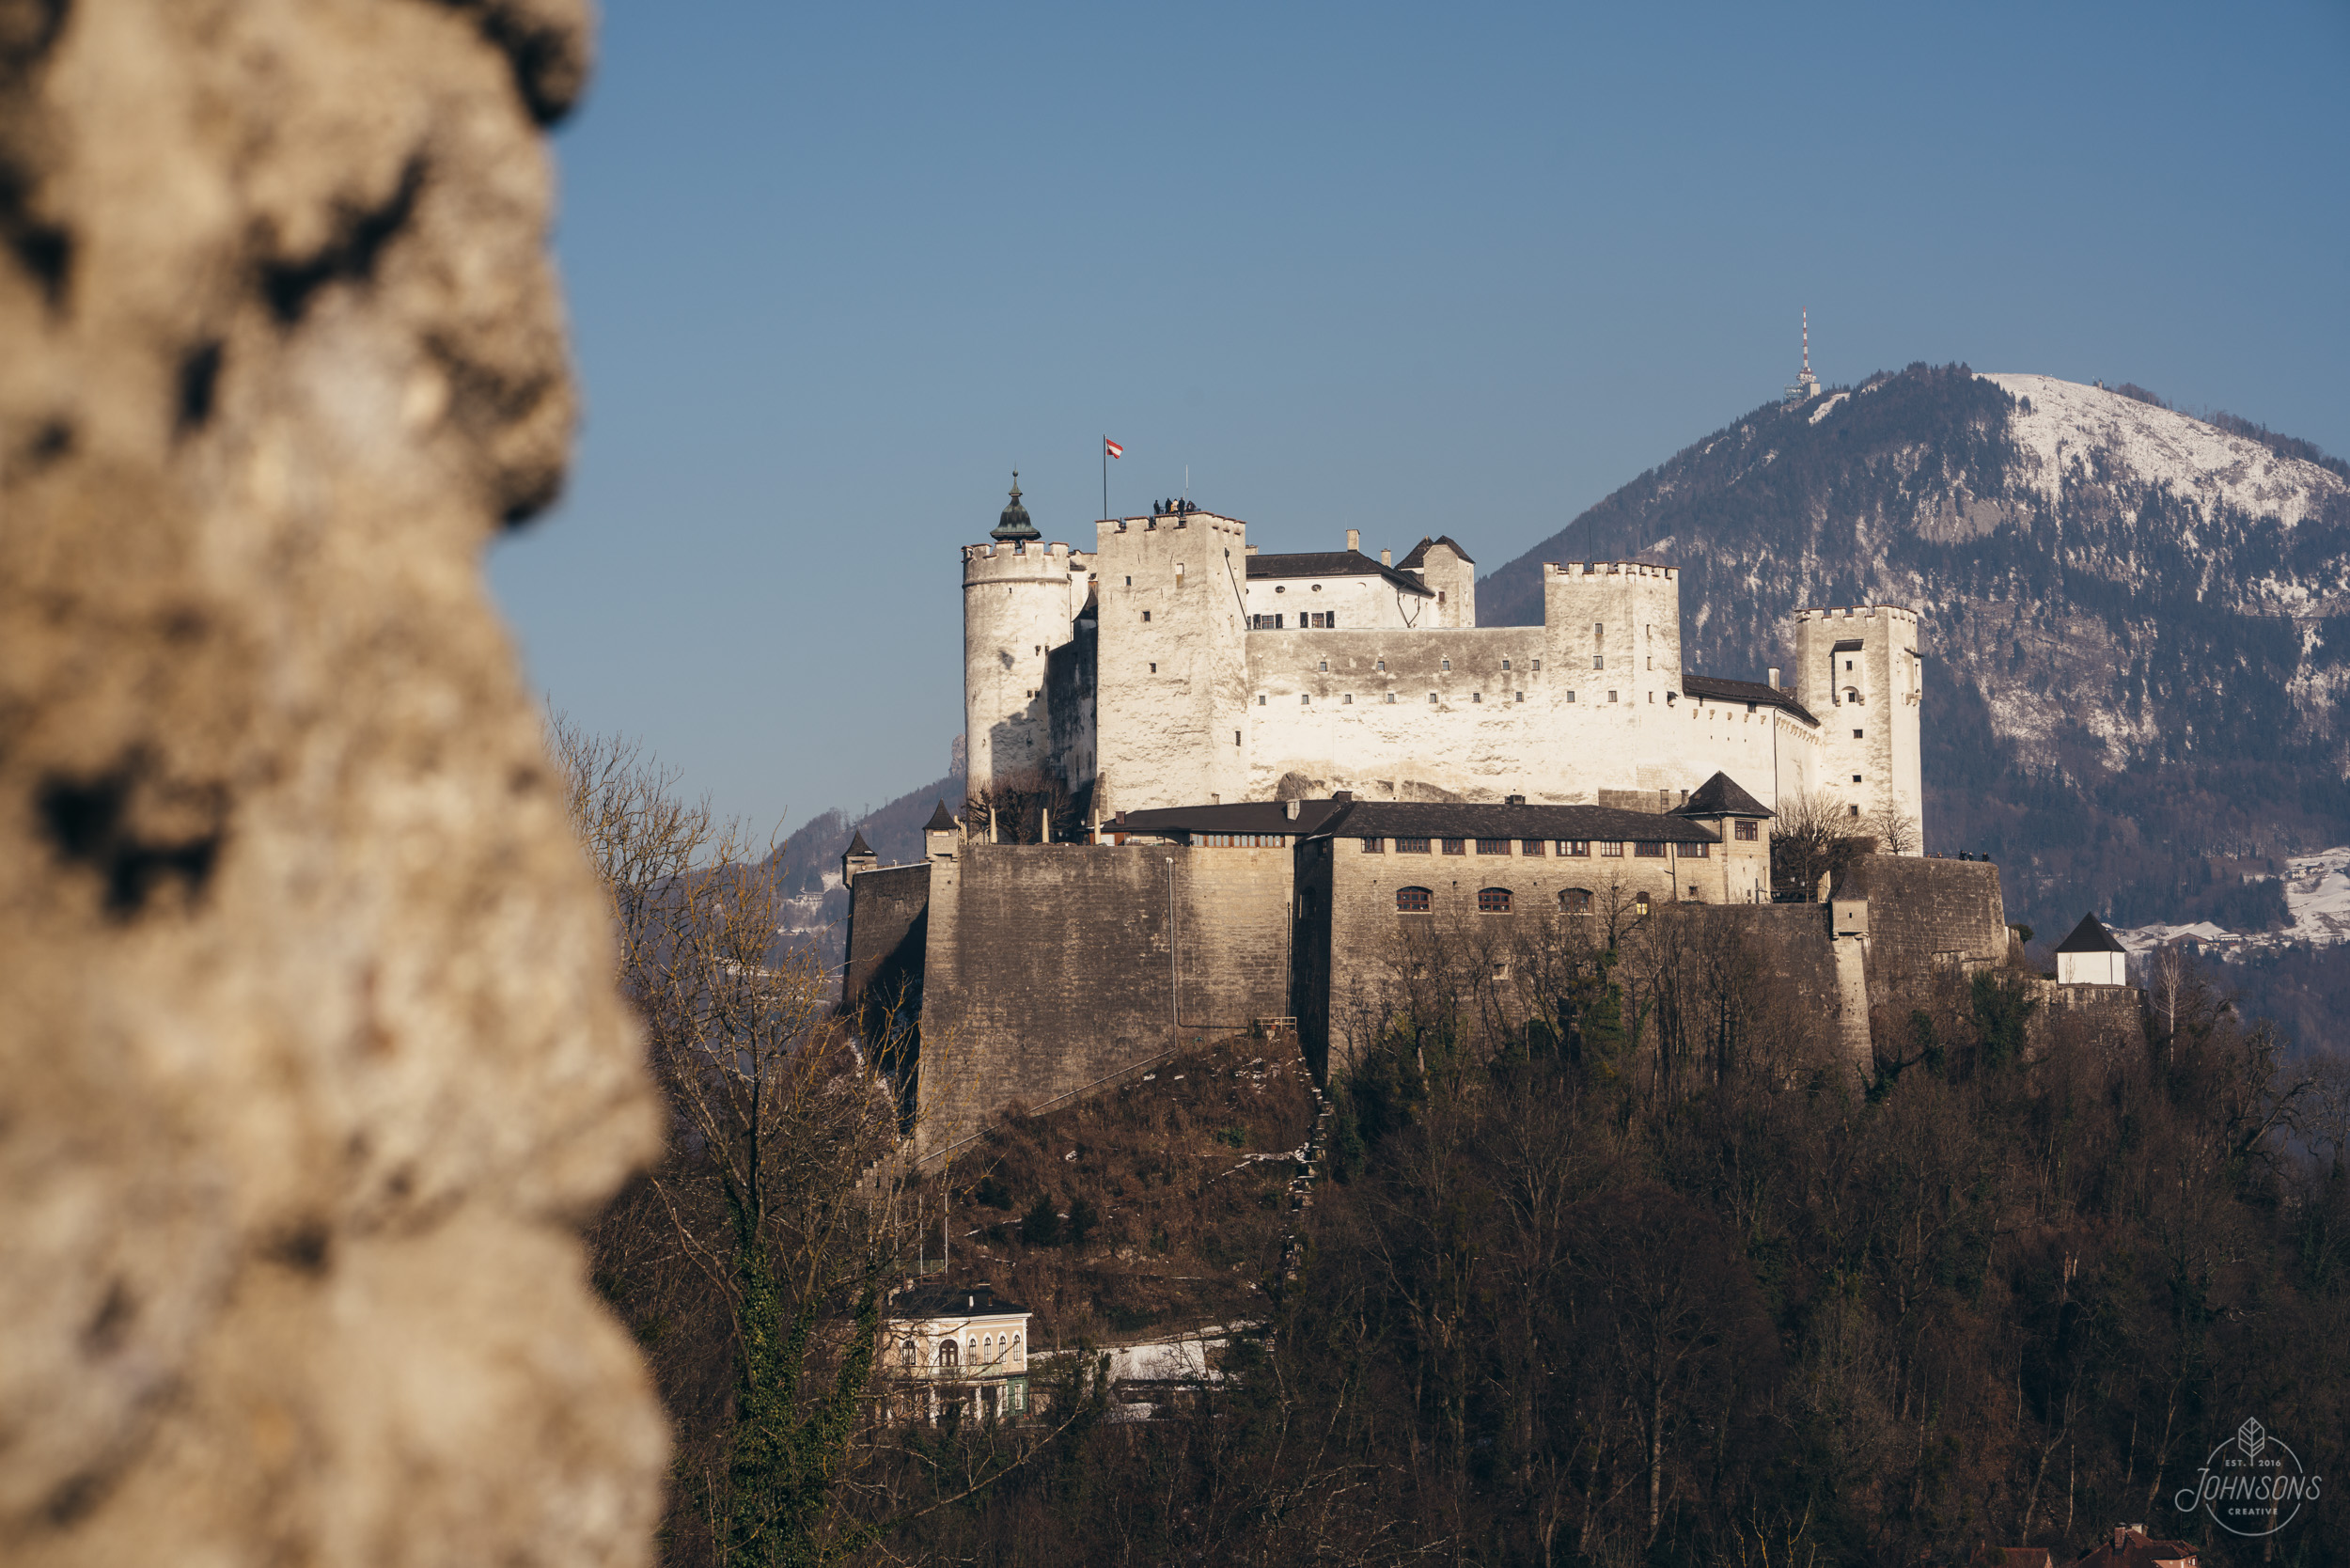  Sony a7rii |&nbsp;85mm 1.8 |&nbsp;f10 |&nbsp;1/320 |&nbsp;ISO 100     This is Hohensalzburg Castle, which is touristy inside but is pretty neat (although overpriced). Photo wise I couldn't find any great compositions, but google images tells me that